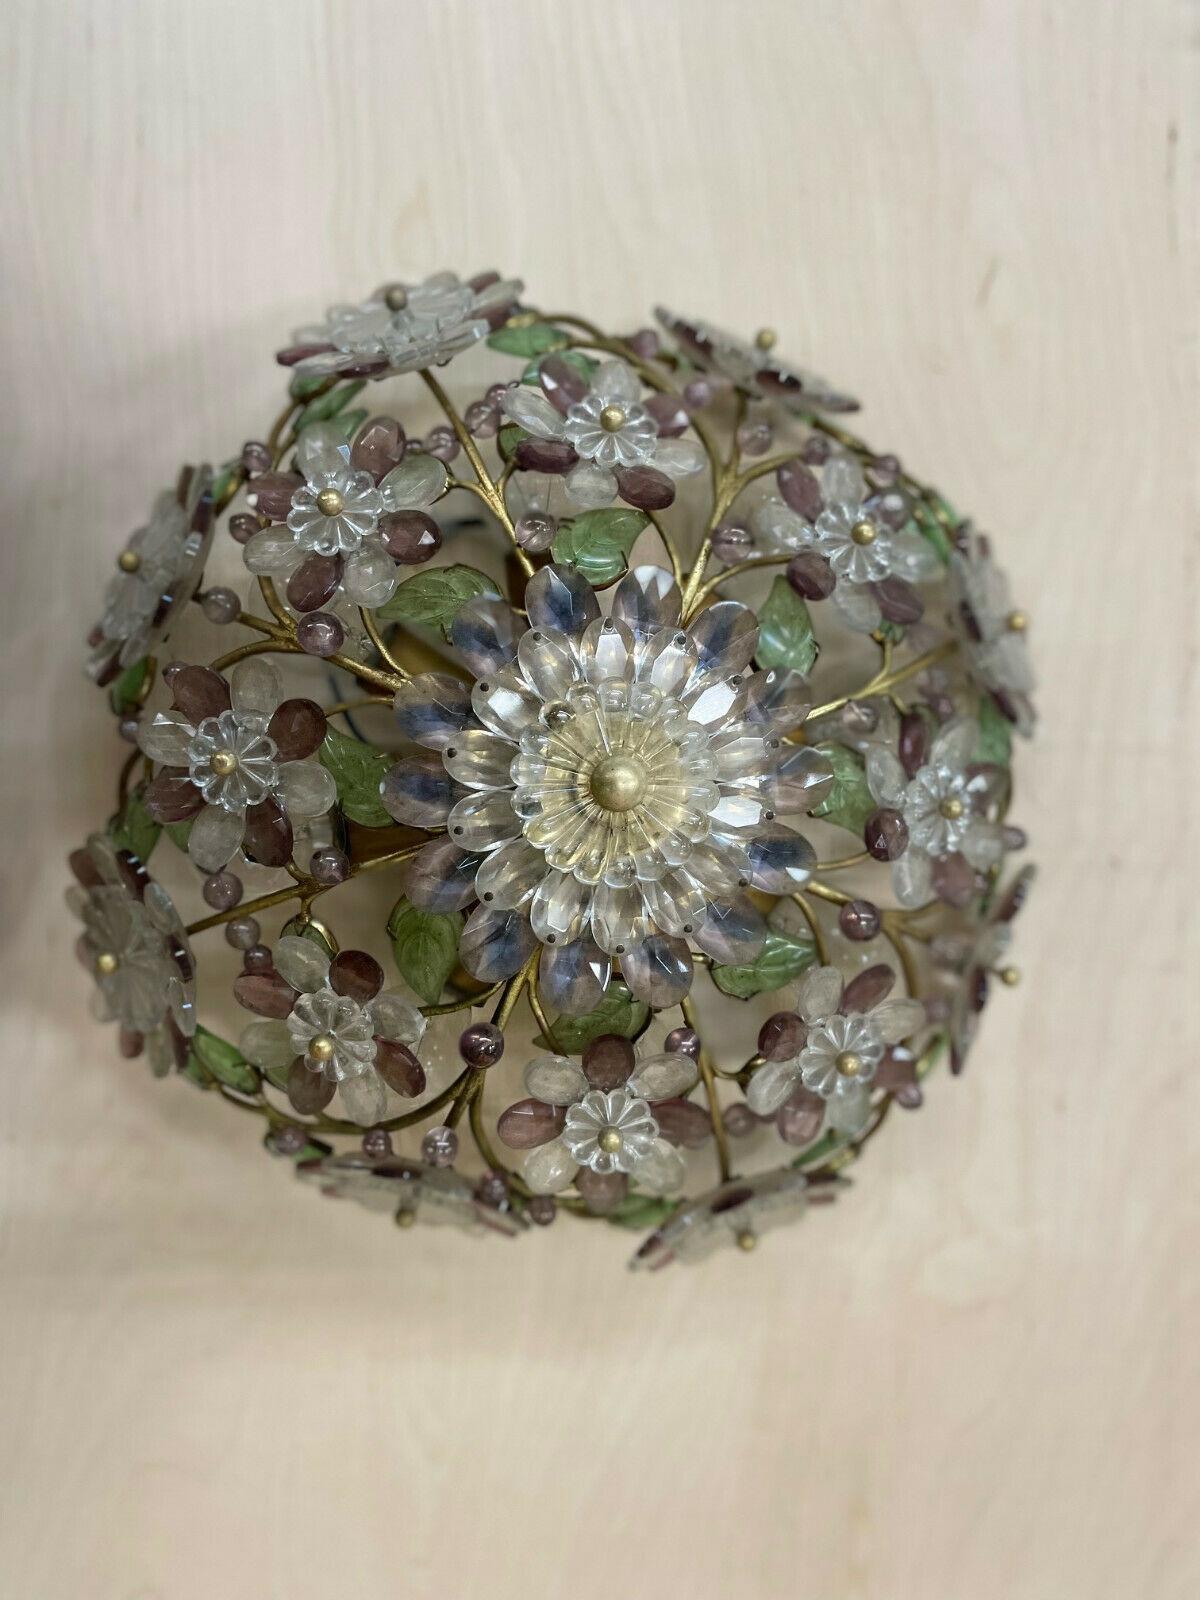 Stunning 1940s Hollywood Regency Cut Crystal Blooming Flower/ Bronze Vine Ceiling Flush Mount. 8 lights and very high quality manufactured by Palwa.